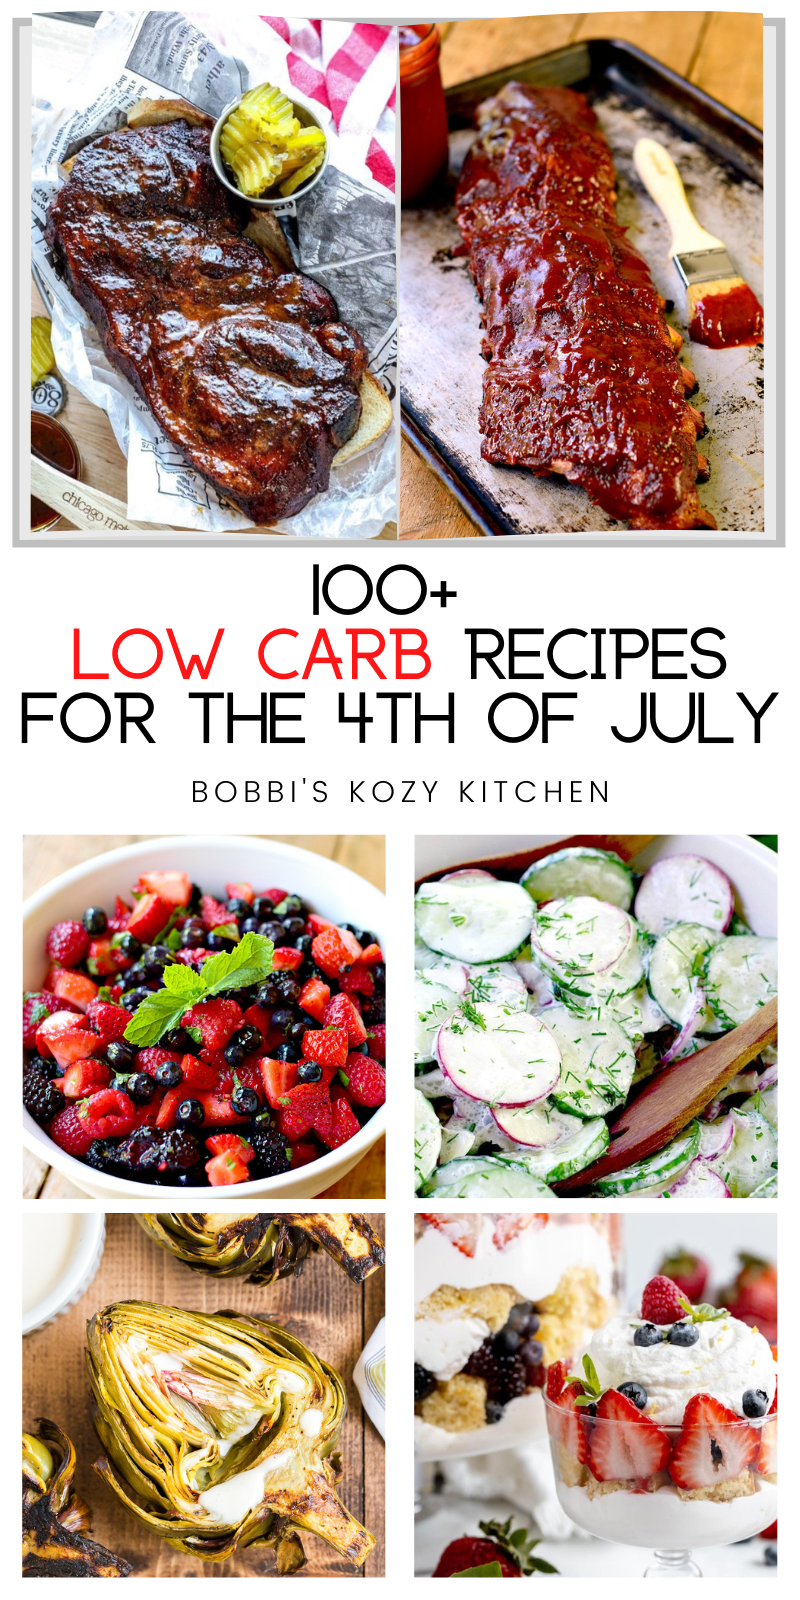 100+ Keto and Low Carb Recipes for the 4th of July - I have put together 100 of the best keto and low carb appetizers, side dishes, main dishes, and dessert ideas. They are all sure to make your picnic, party, or BBQ a tasty one! #keto #lowcarb #bbq #grilling #appetizer #sidedish #maindish#desserts